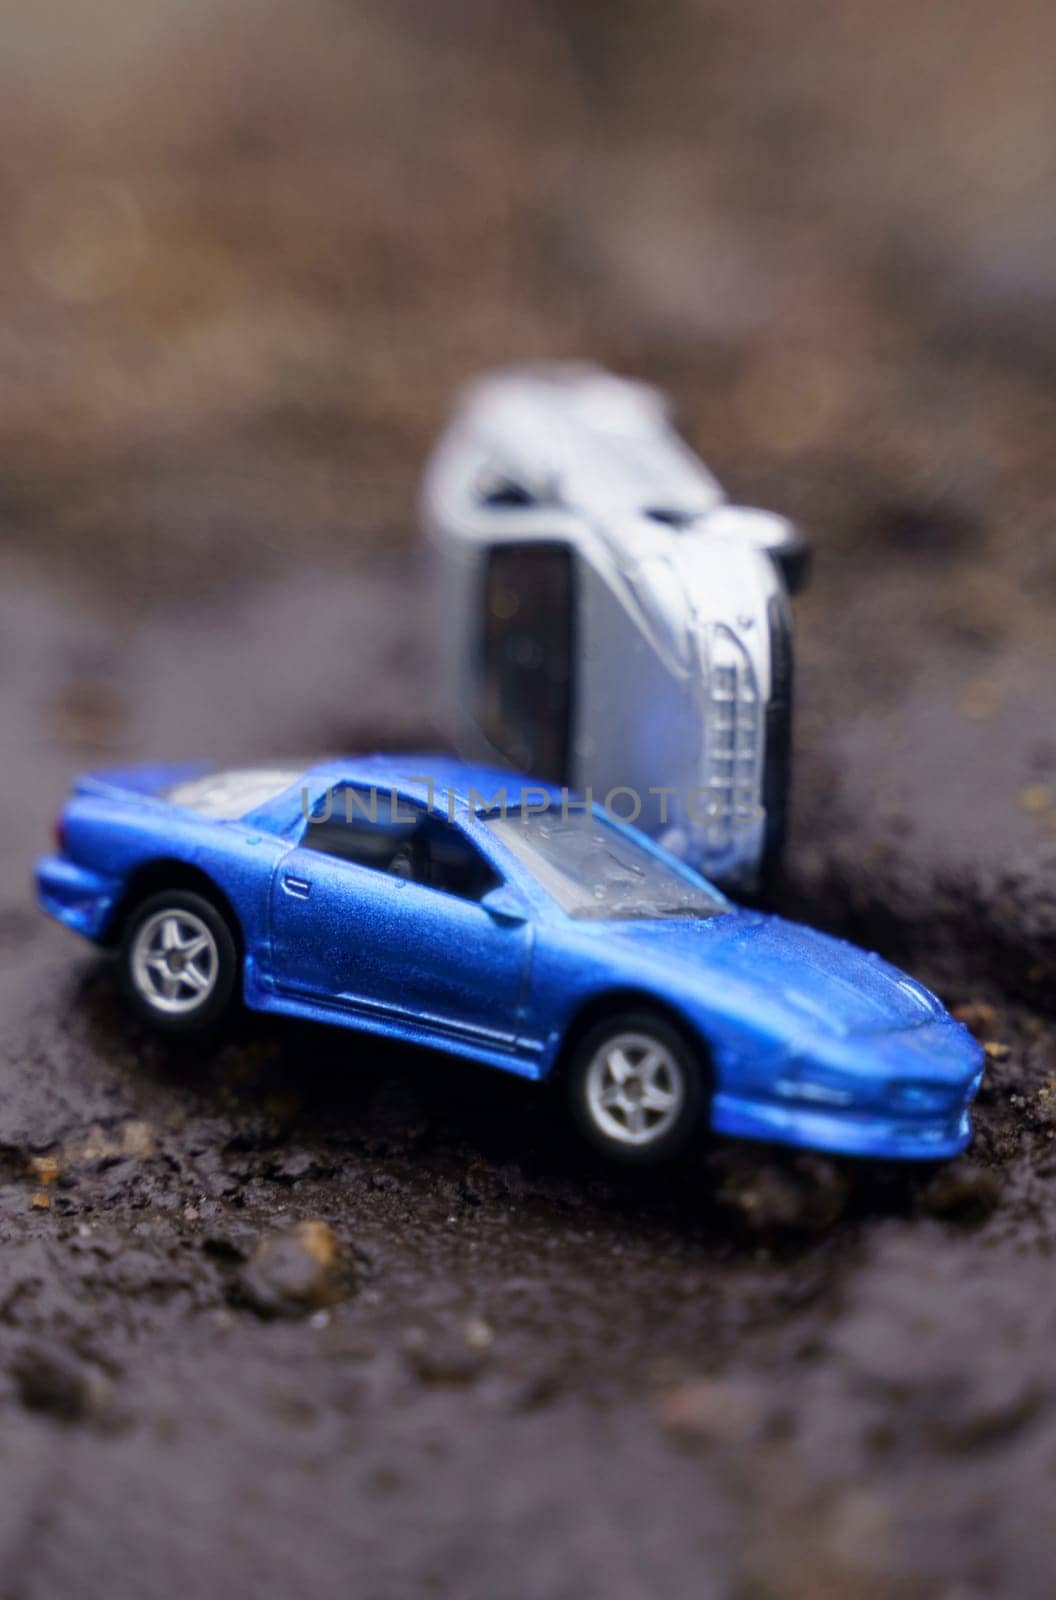 Natural disasters. One car overturned on another as a result of a landslide. One of them is out of focus.